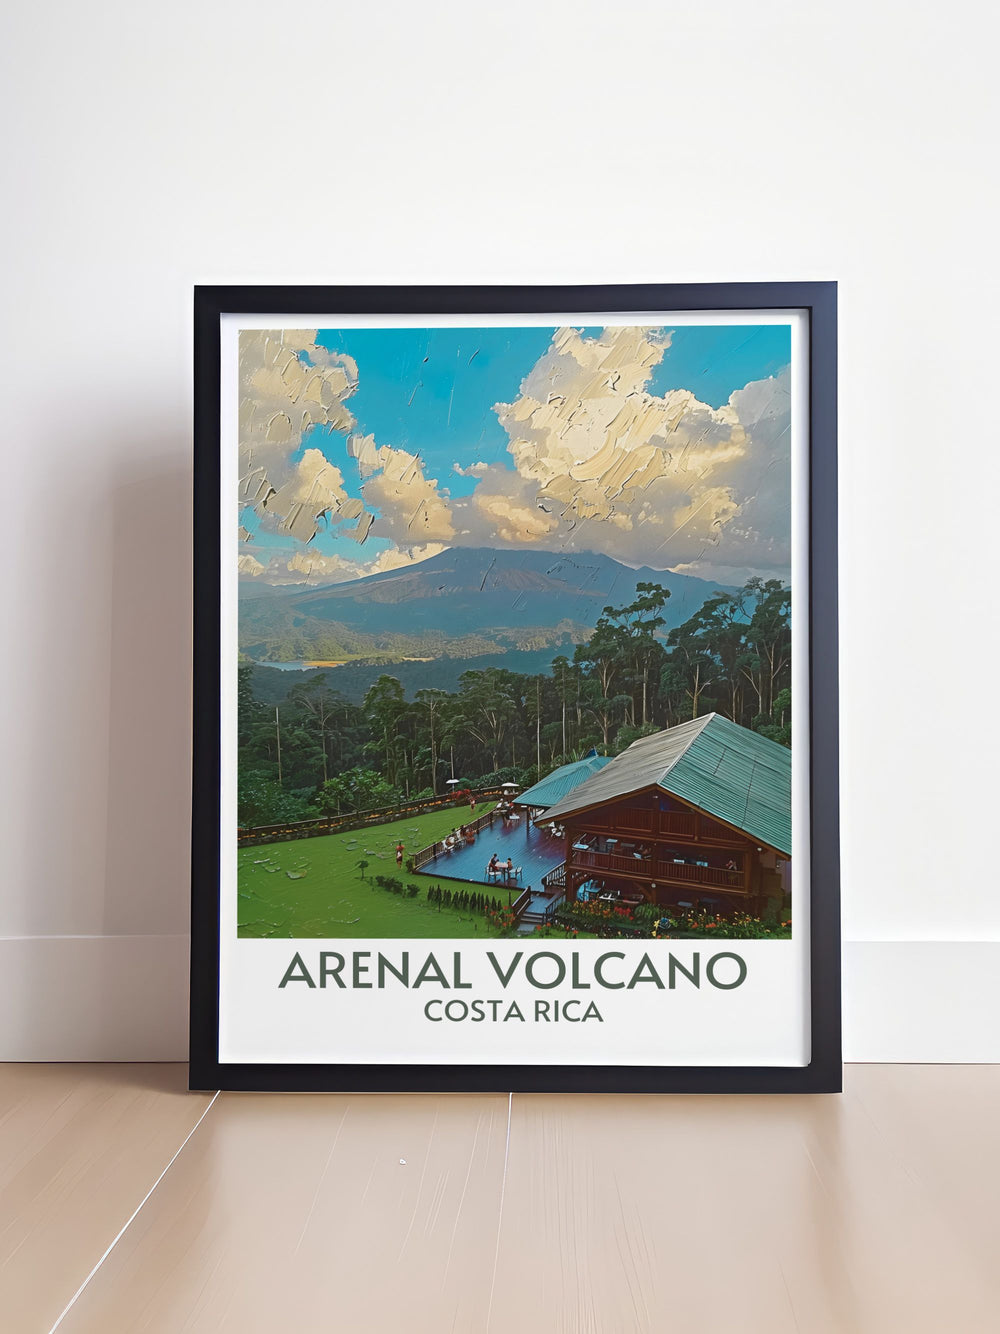 The Arenal Observatory Lounge and Spa depicted in a serene print, inviting viewers to experience luxury amidst the wild.